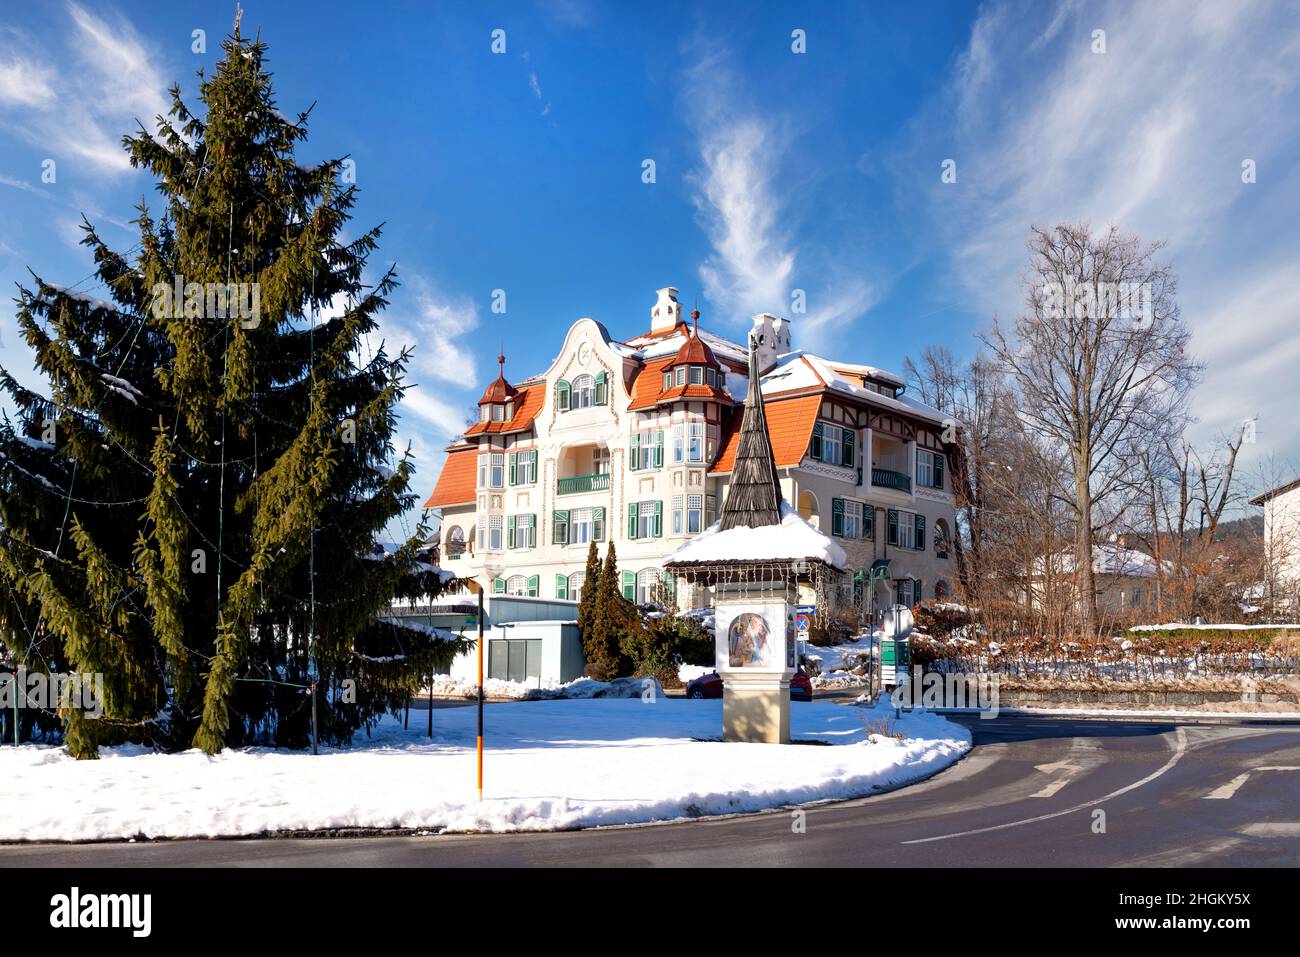 Velden am Wörthersee in winter at christmas time, Austria Stock Photo